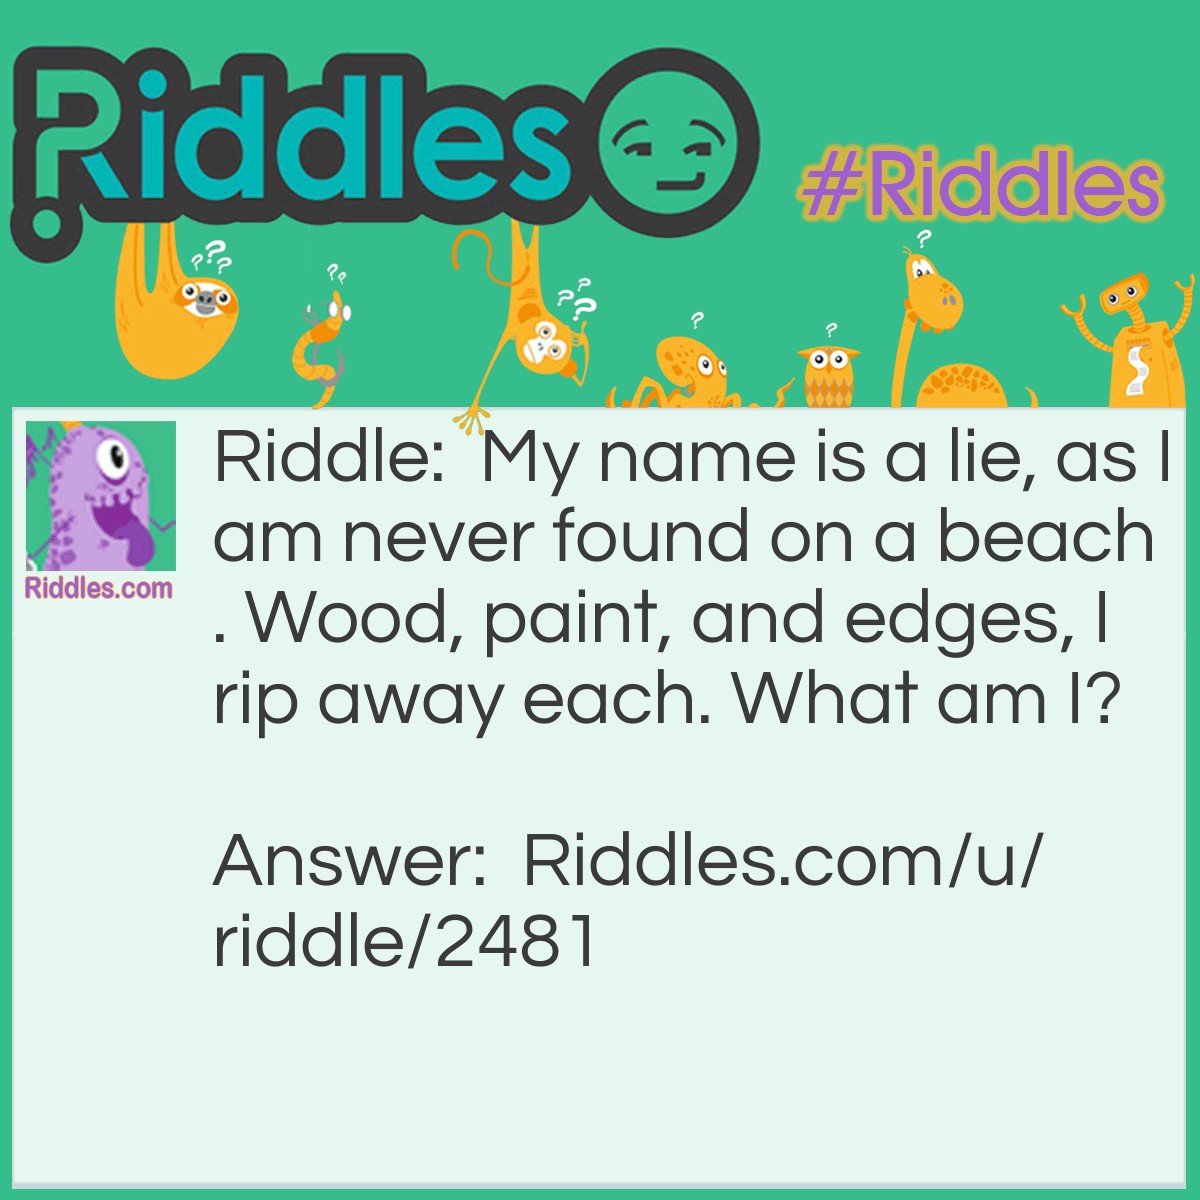 Riddle: My name is a lie, as I am never found on a beach. Wood, paint, and edges, I rip away each. What am I? Answer: Sandpaper.